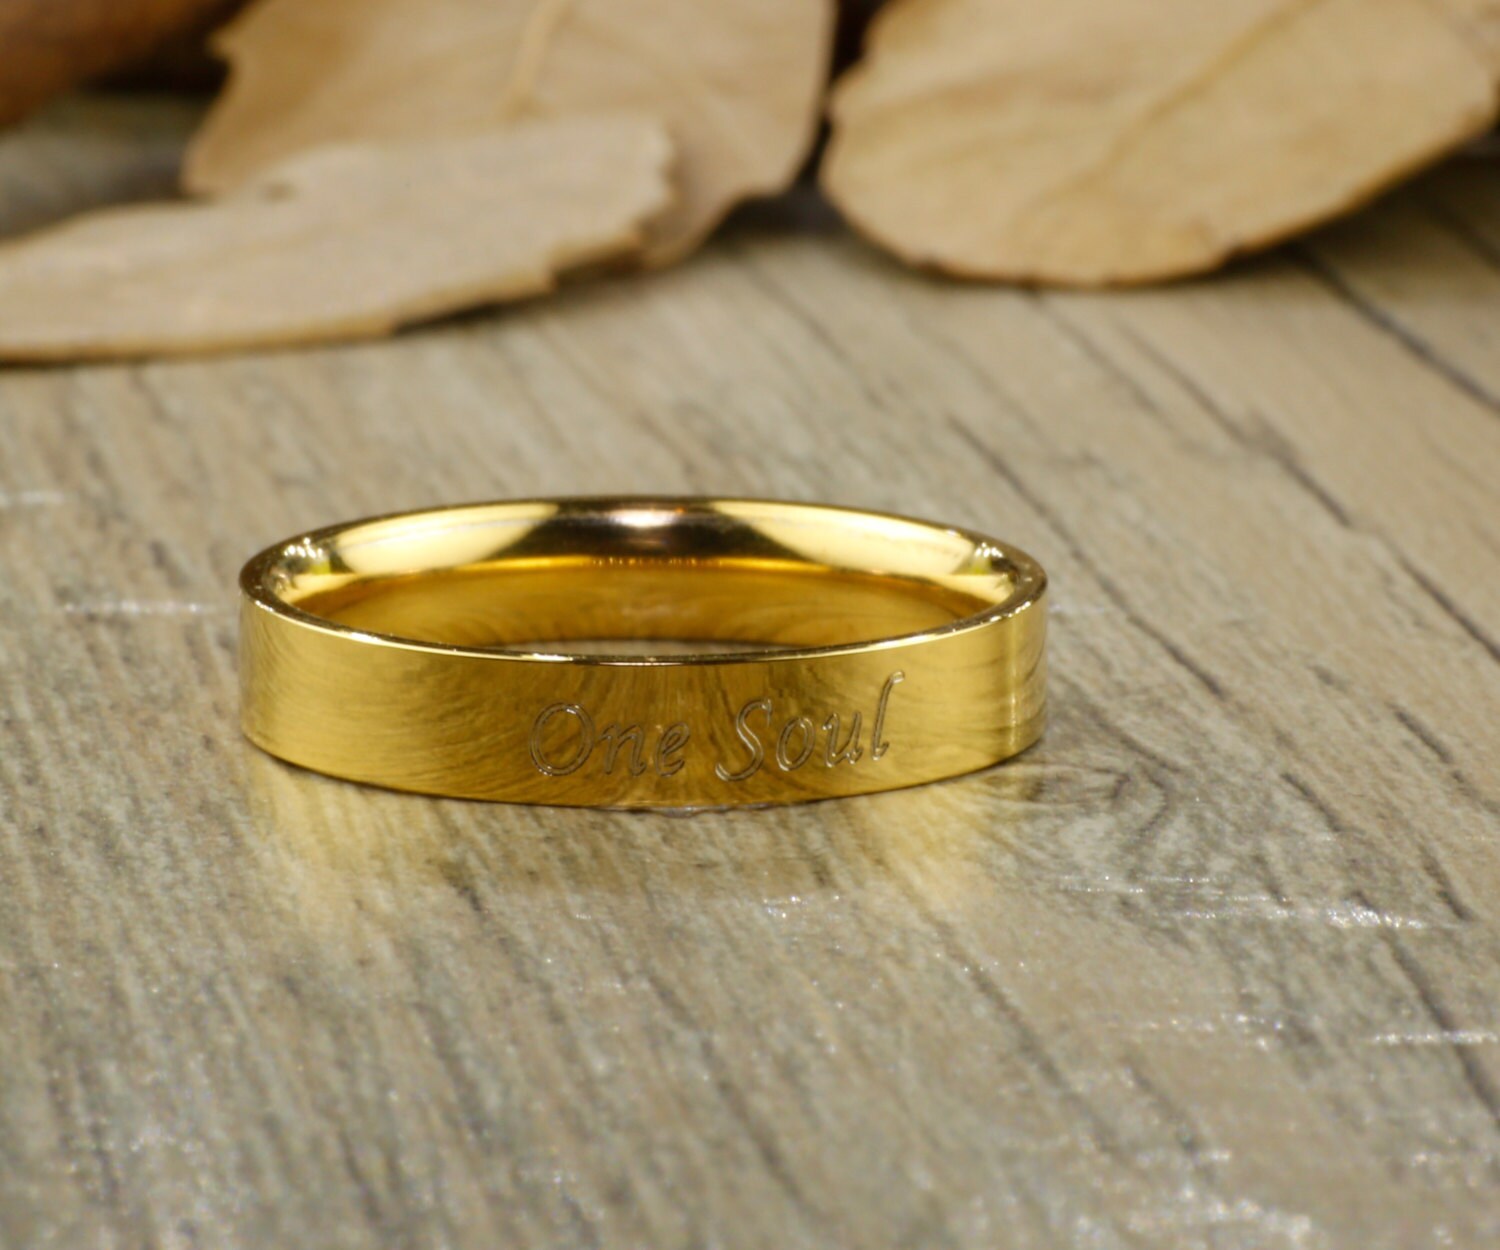 Handmade Your Marriage Vow & Signature Rings Wedding Rings, Matching W –  jringstudio